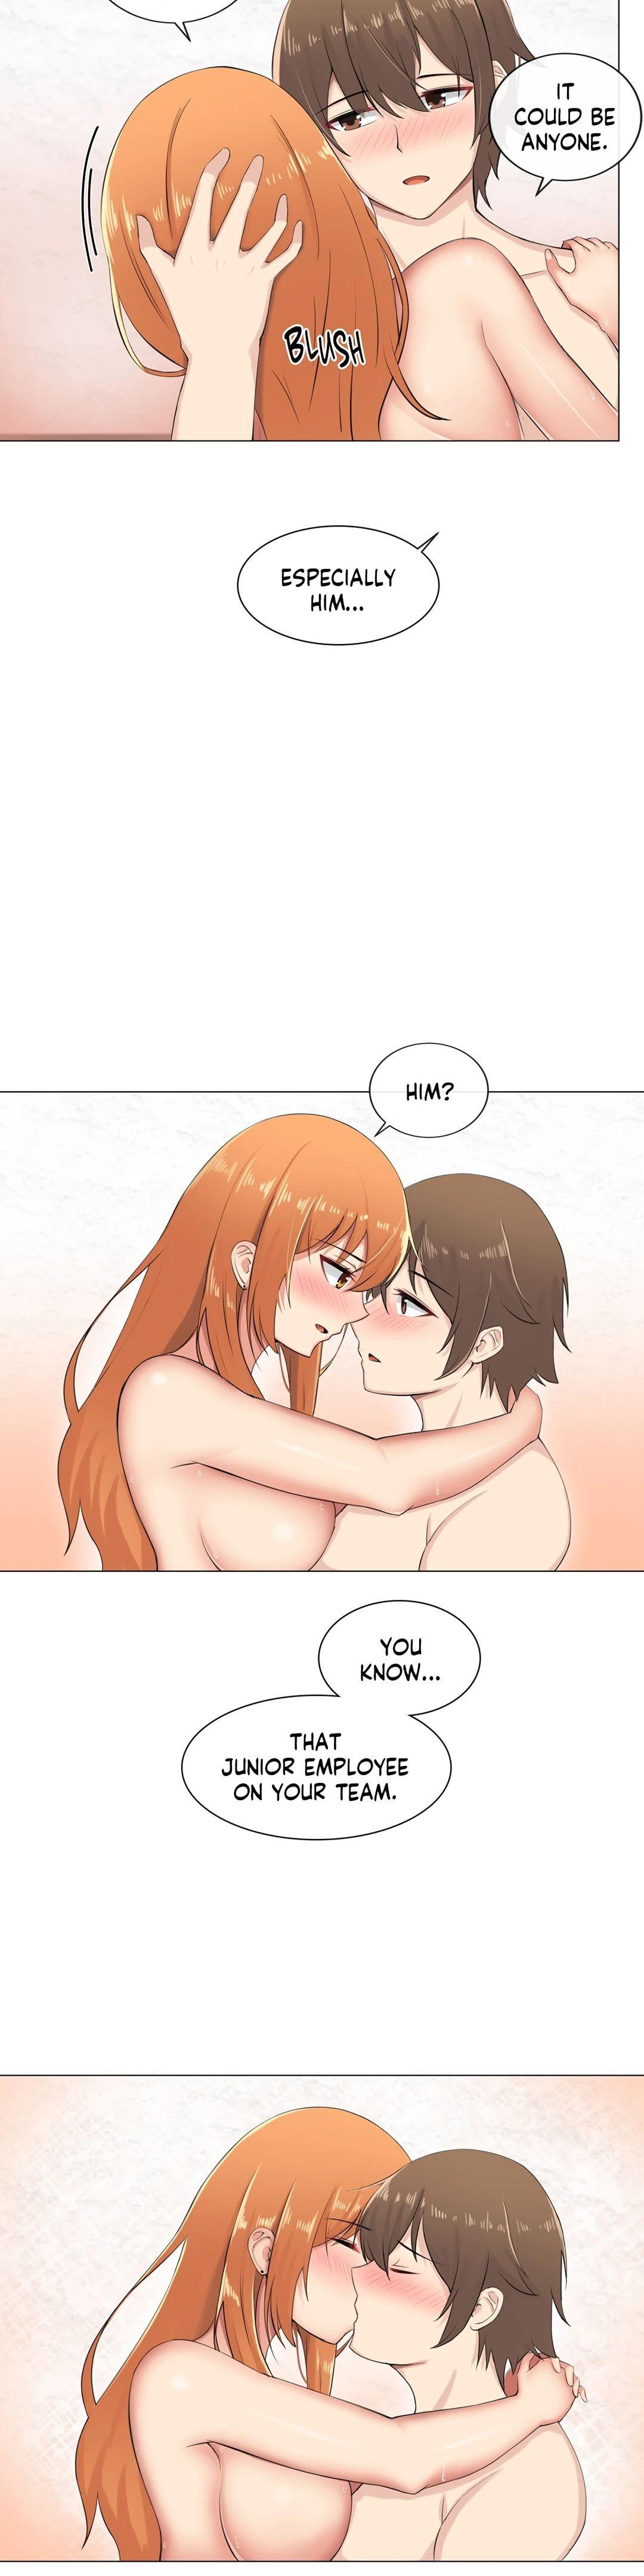 [Dumangoon, 130F] Sexcape Room: Pile Up Ch.9/9 [English] [Manhwa PDF] Completed 204